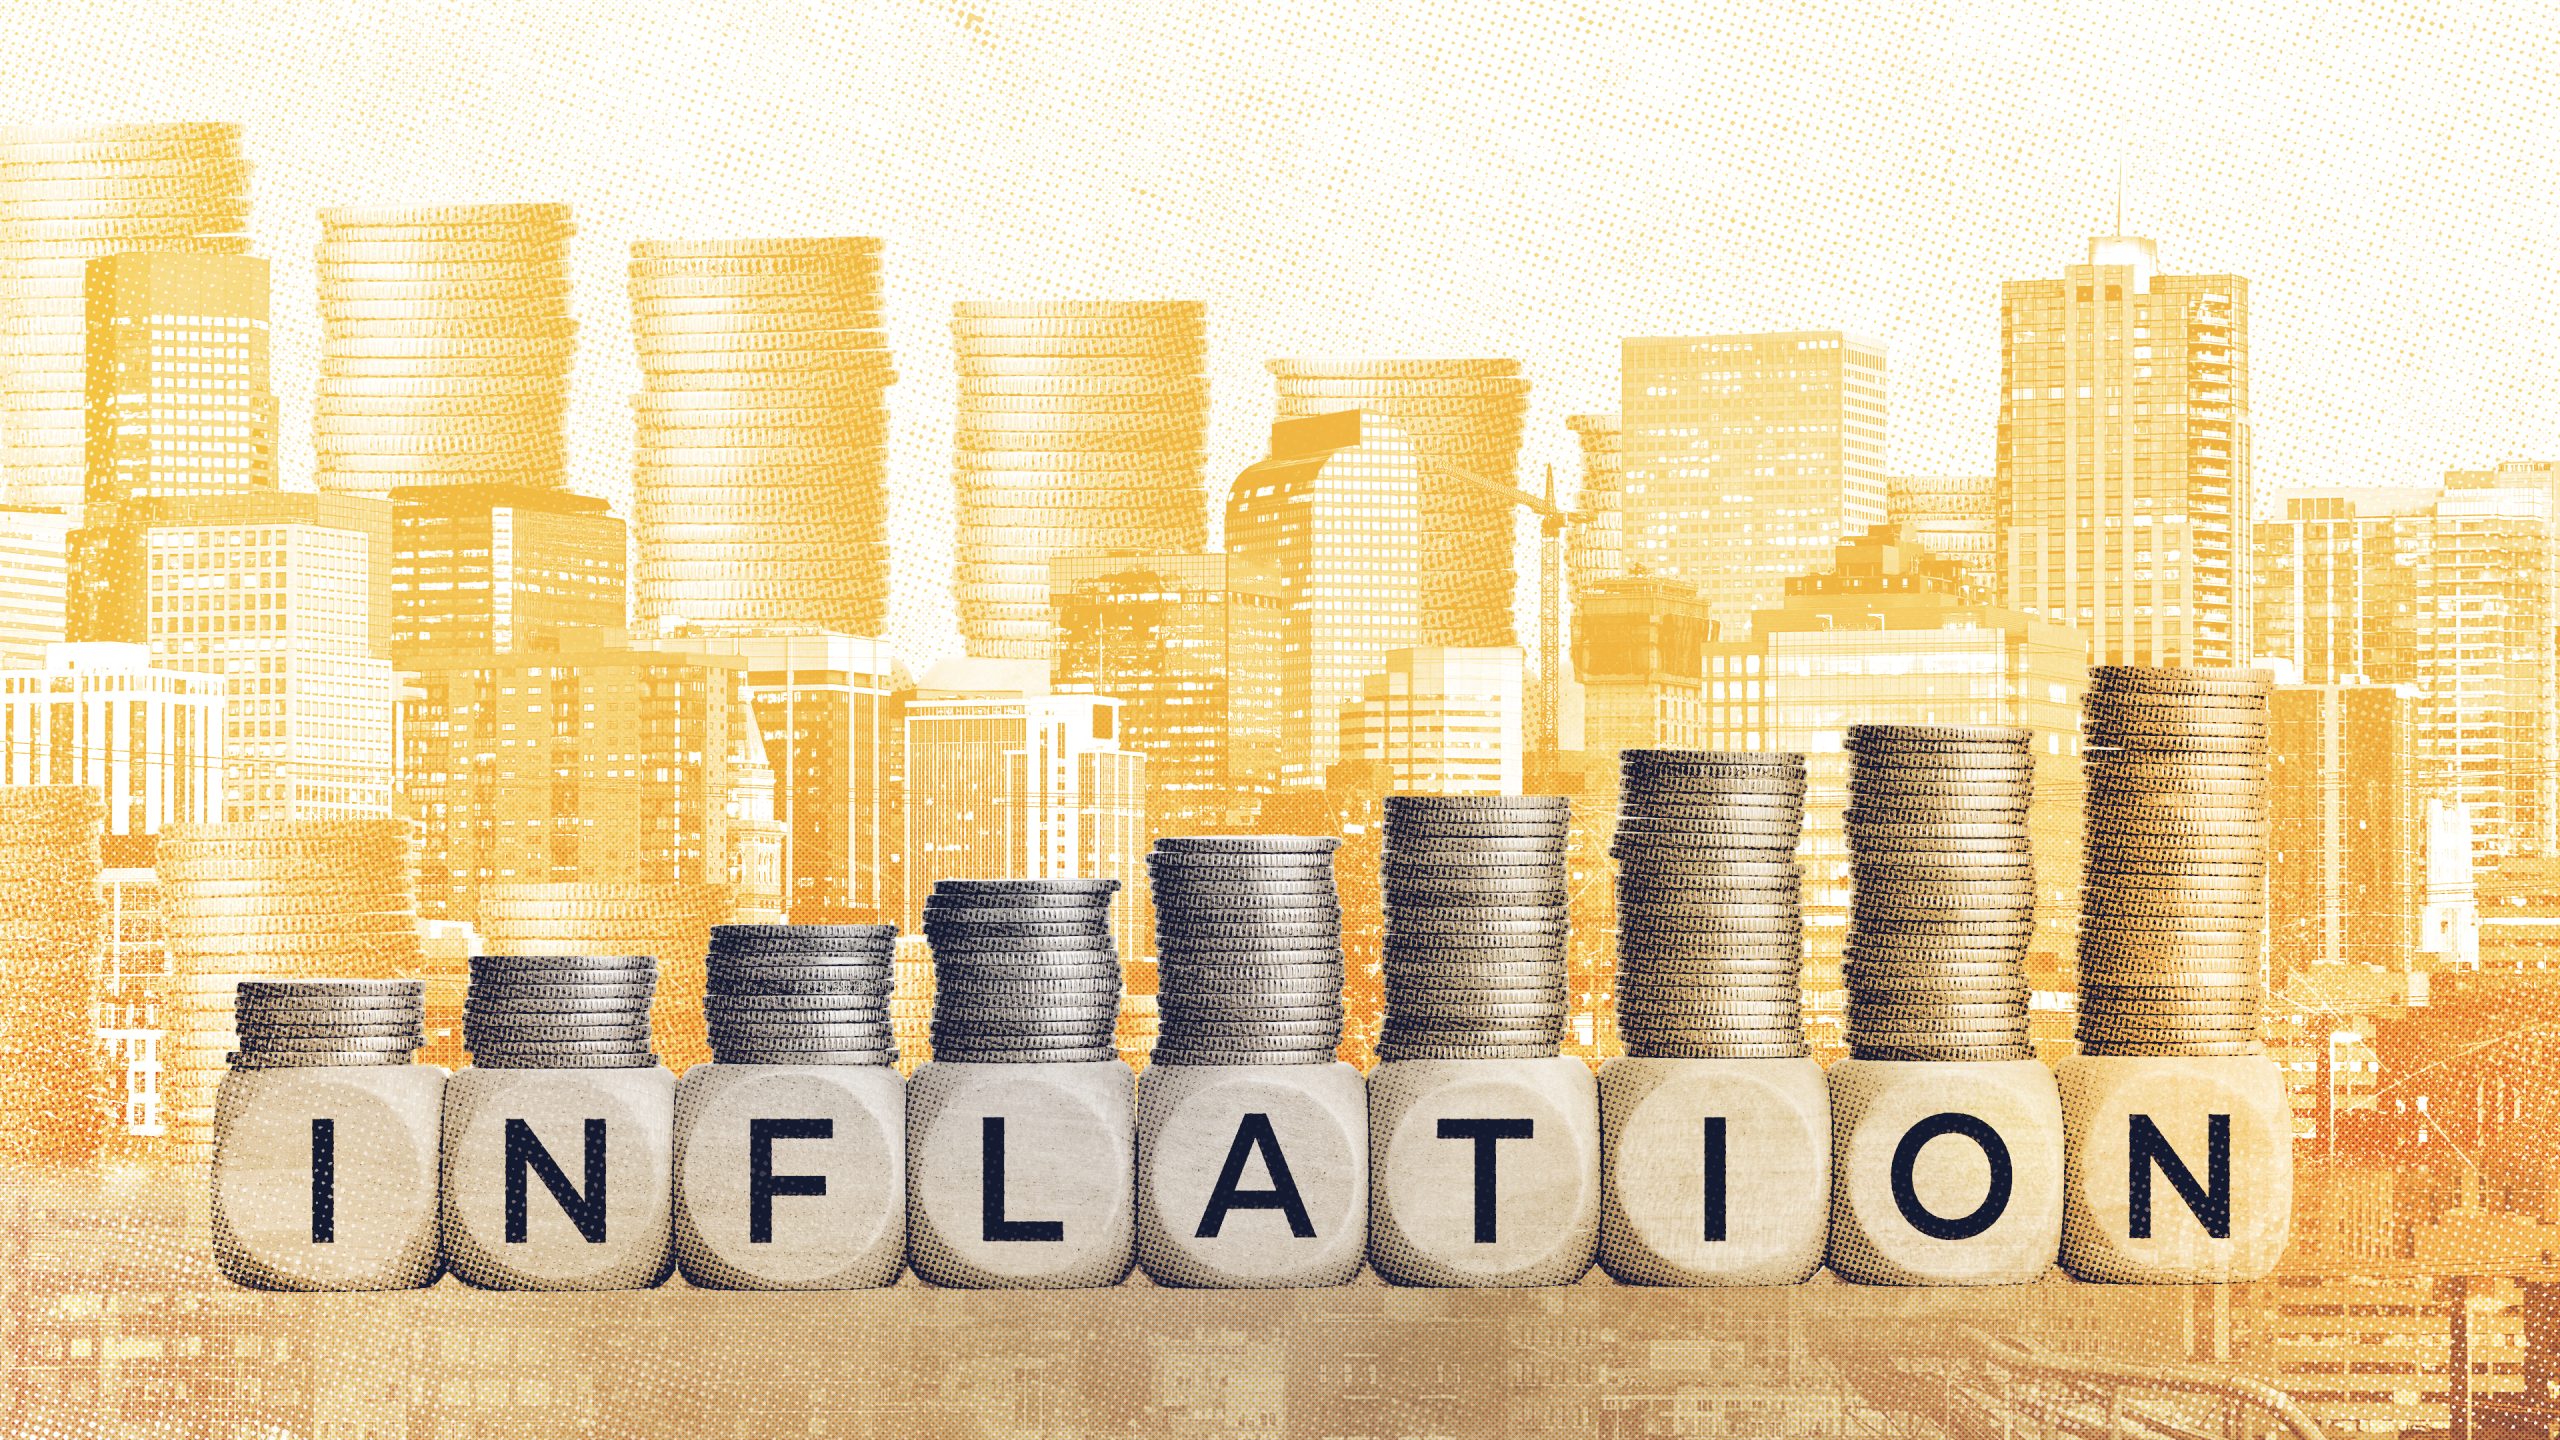 Increasing coin stacks with the word "inflation" in front of a city skyline.